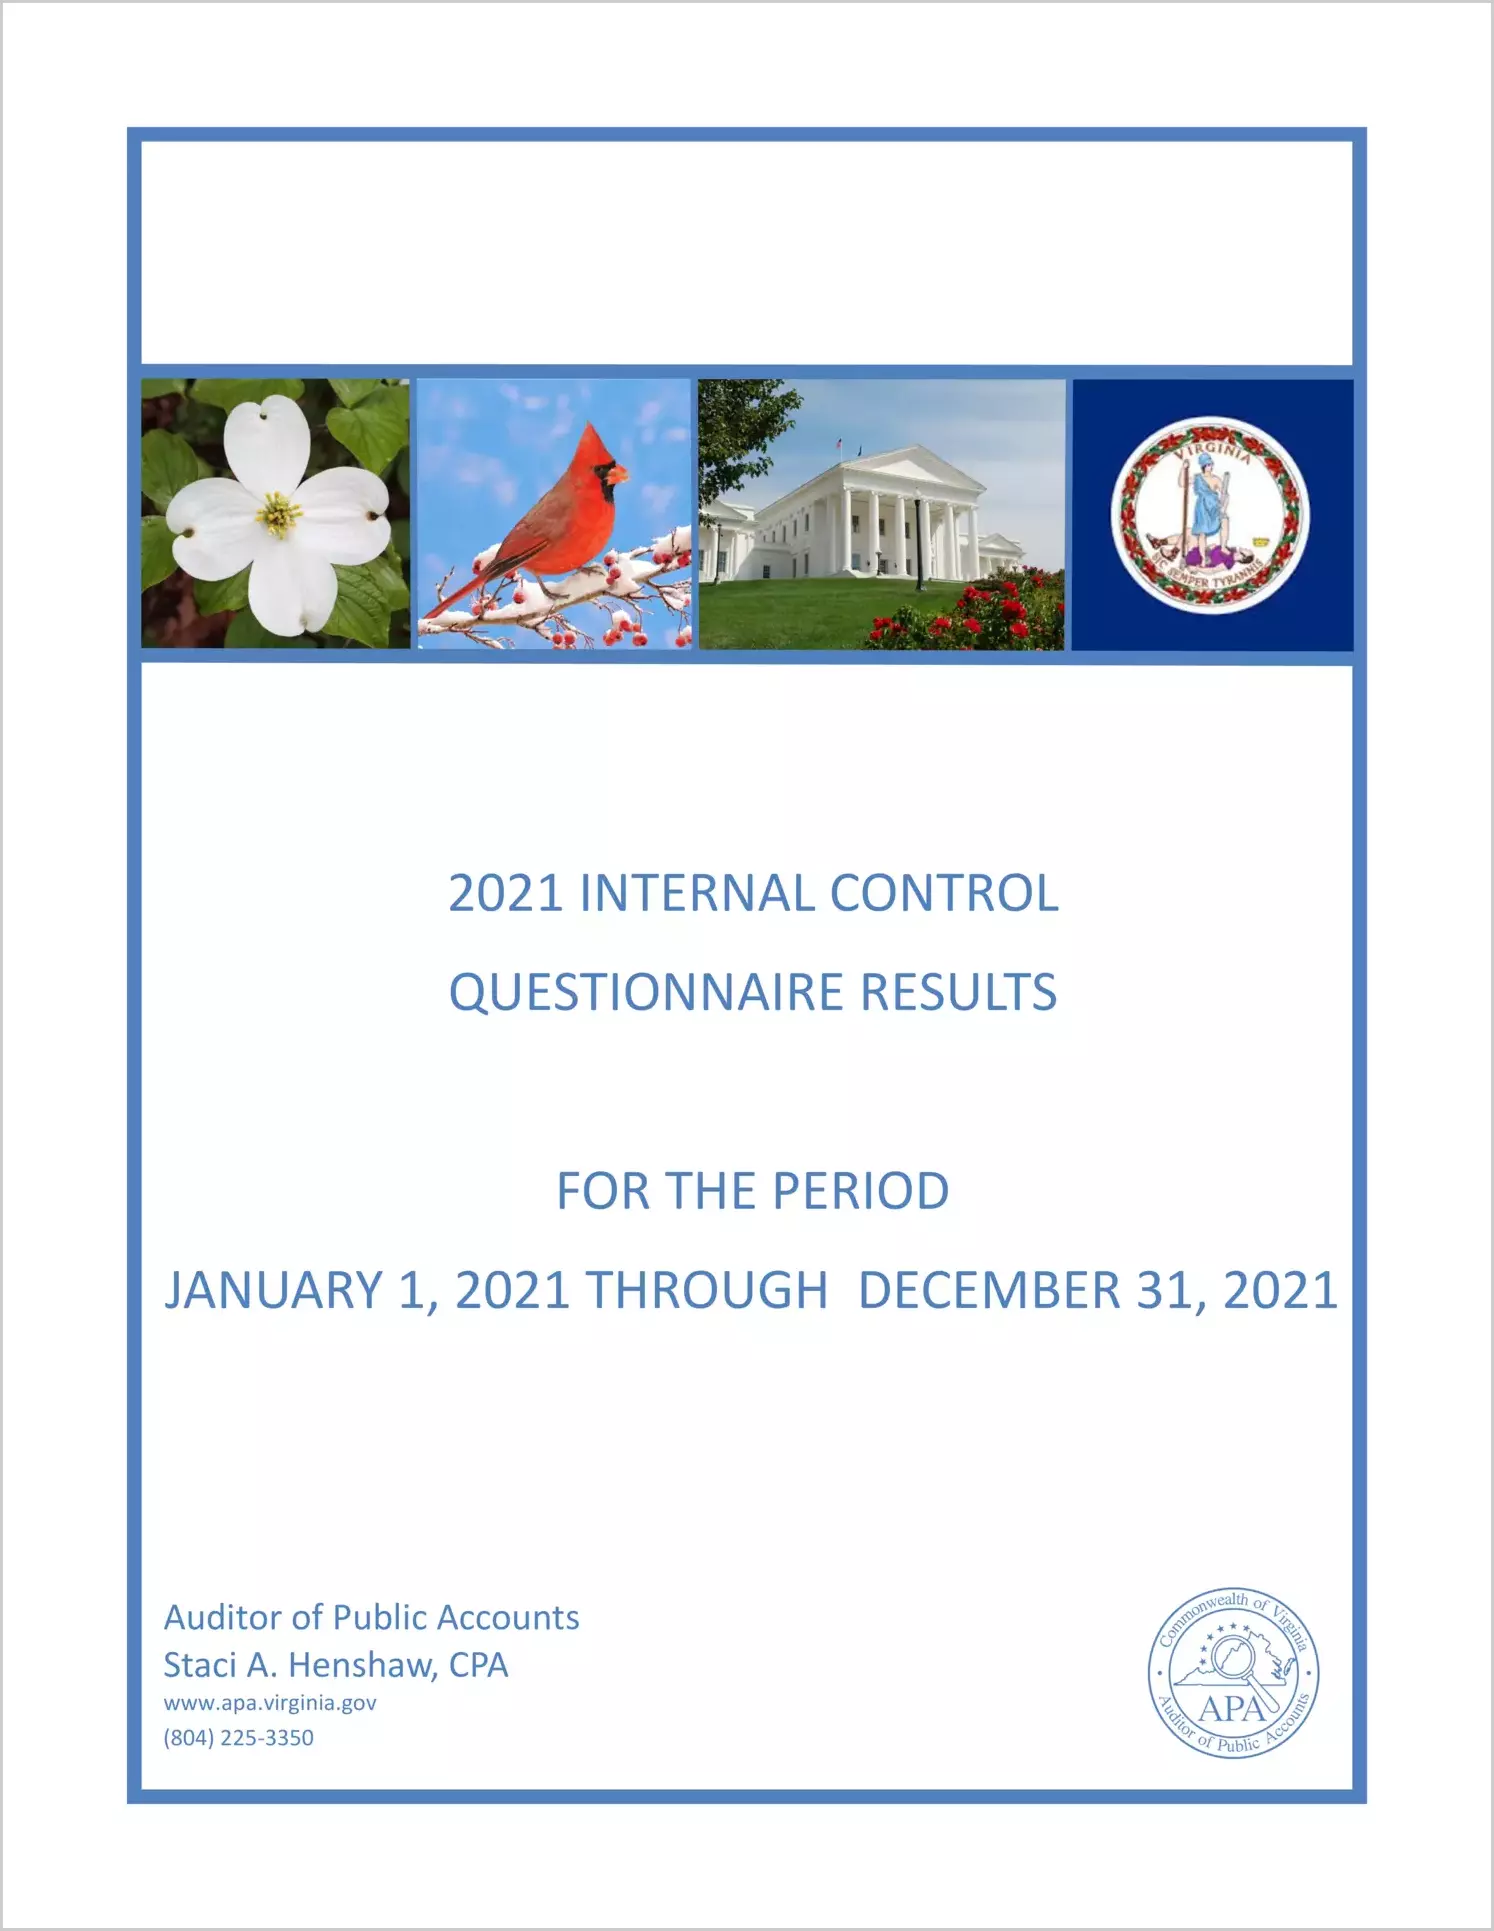 Internal Control Questionnaire Results for the period January 1, 2021 through December 31, 2021